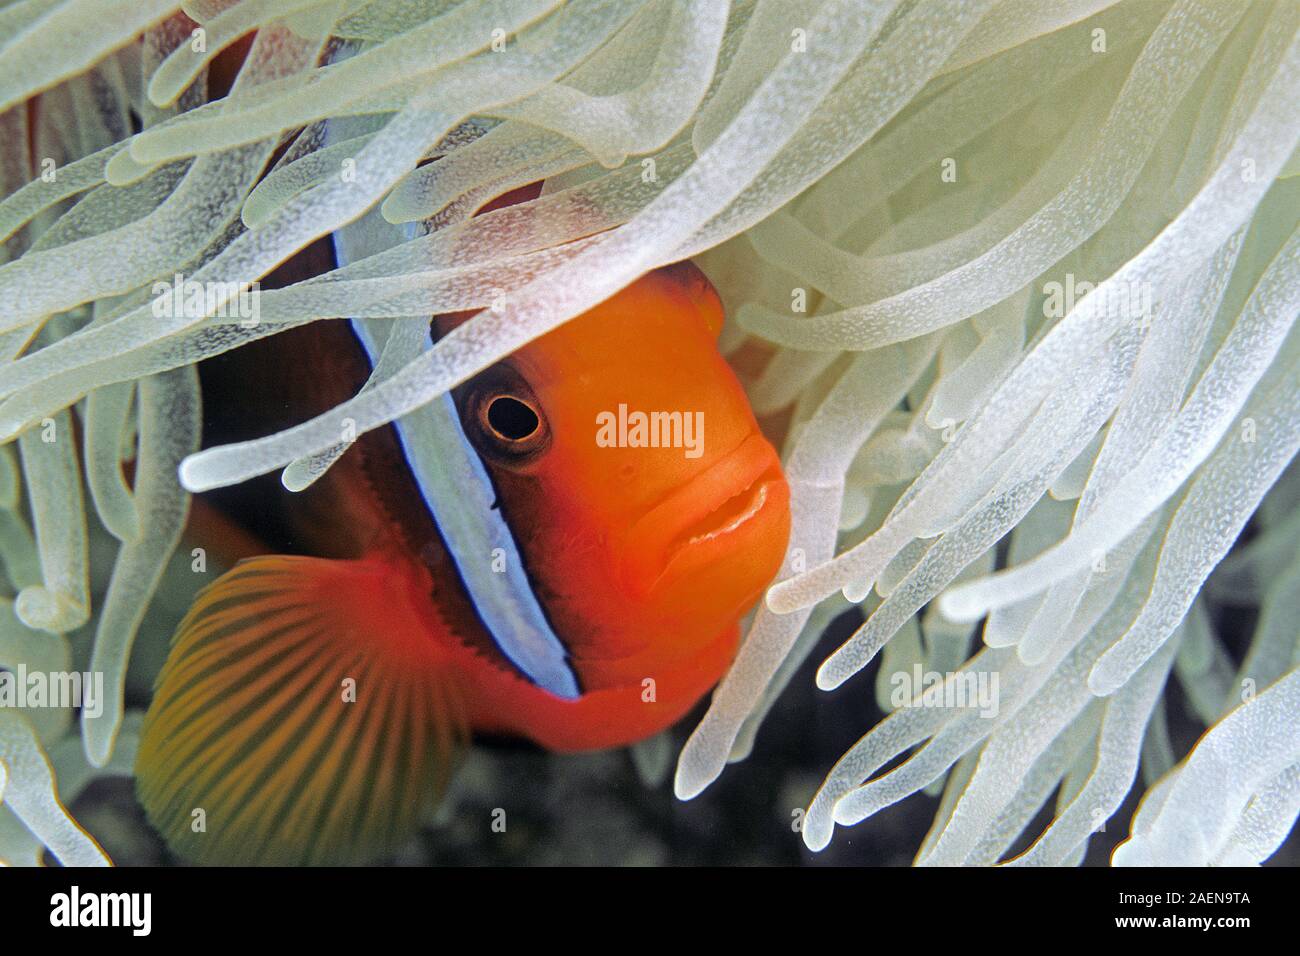 Redfin anemonefish or Bridled anemonefish (Amphiprion frenatus) hiding in a sea anemone, Sabang Beach, Mindoro, Philippines Stock Photo